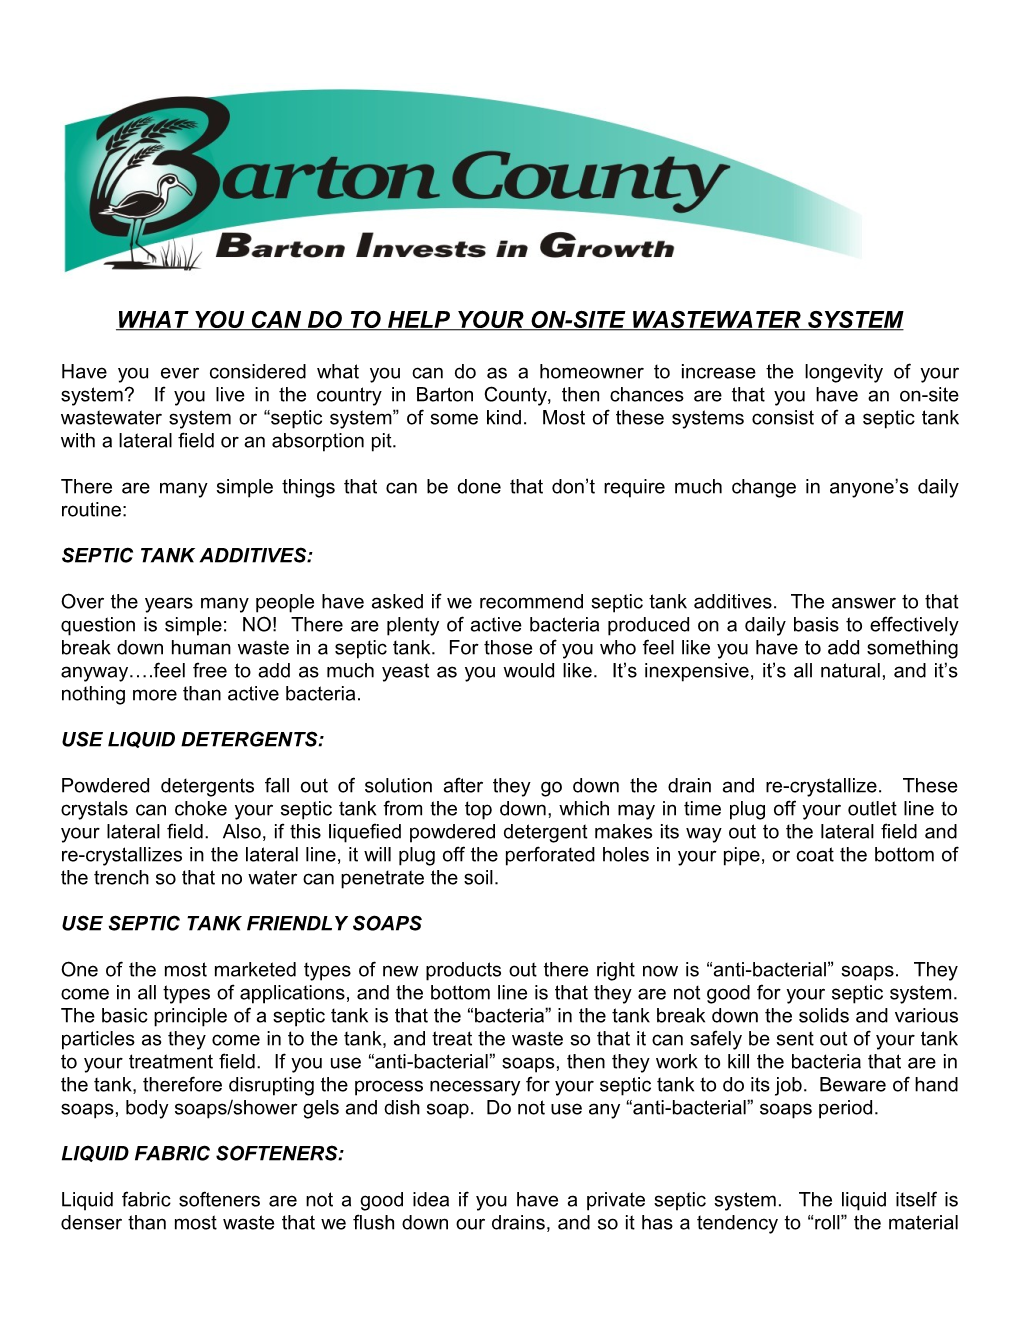 What You Can Do to Help Your On-Site Wastewater System